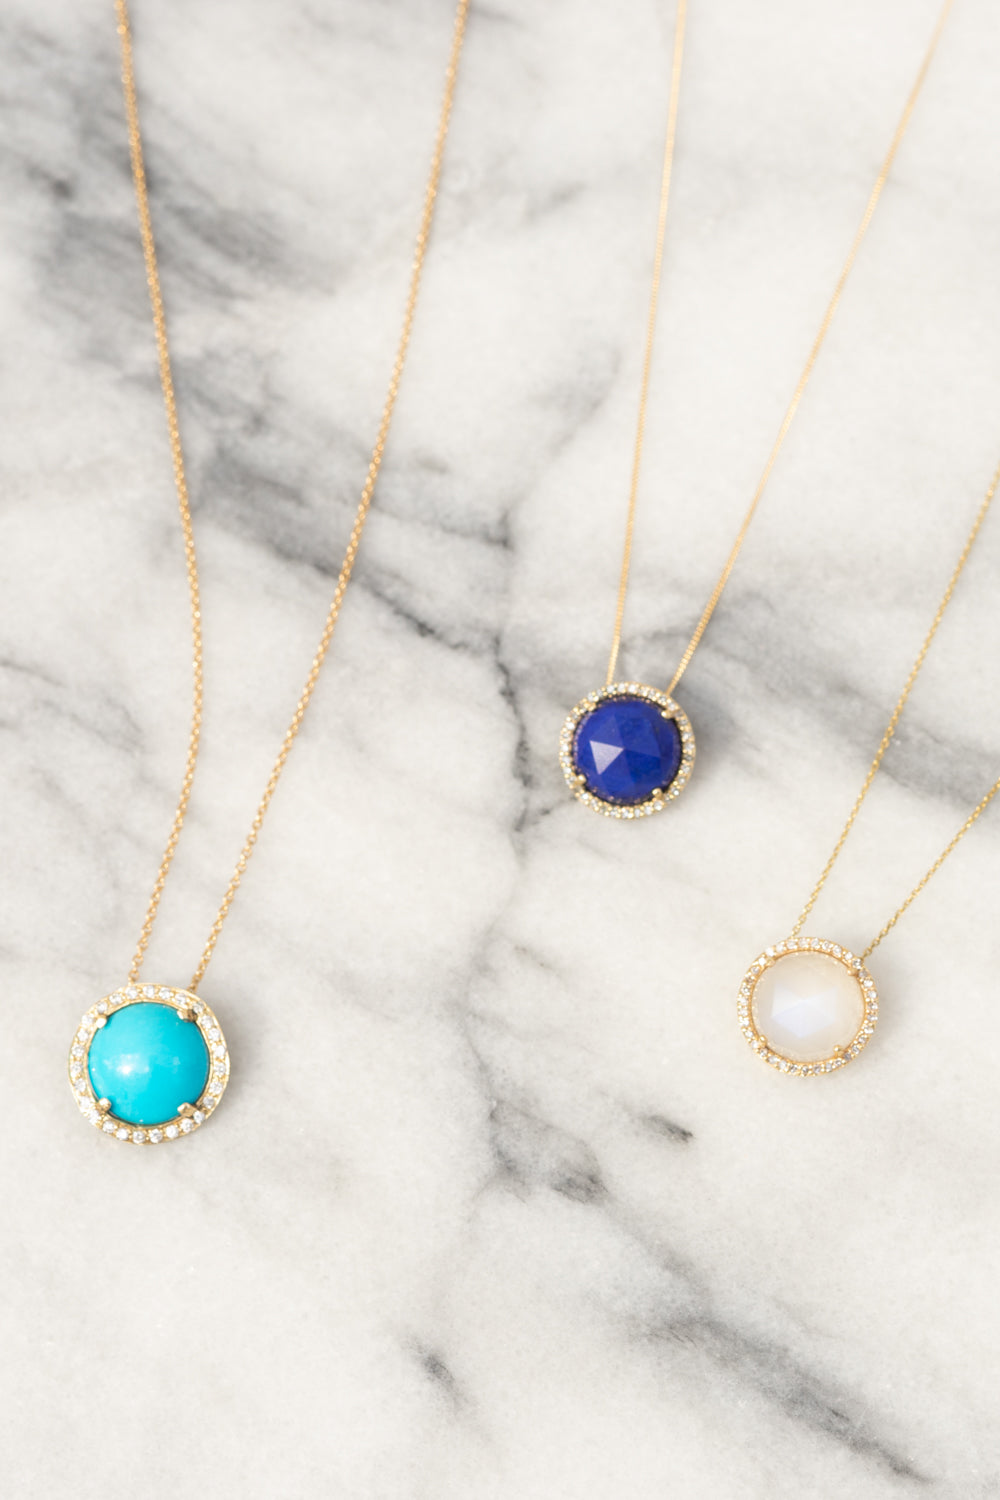 Janna Conner Sleeping Beauty Turquoise, Lapis and Moonstone Necklaces with Diamond Pavé, 14K Yellow Gold